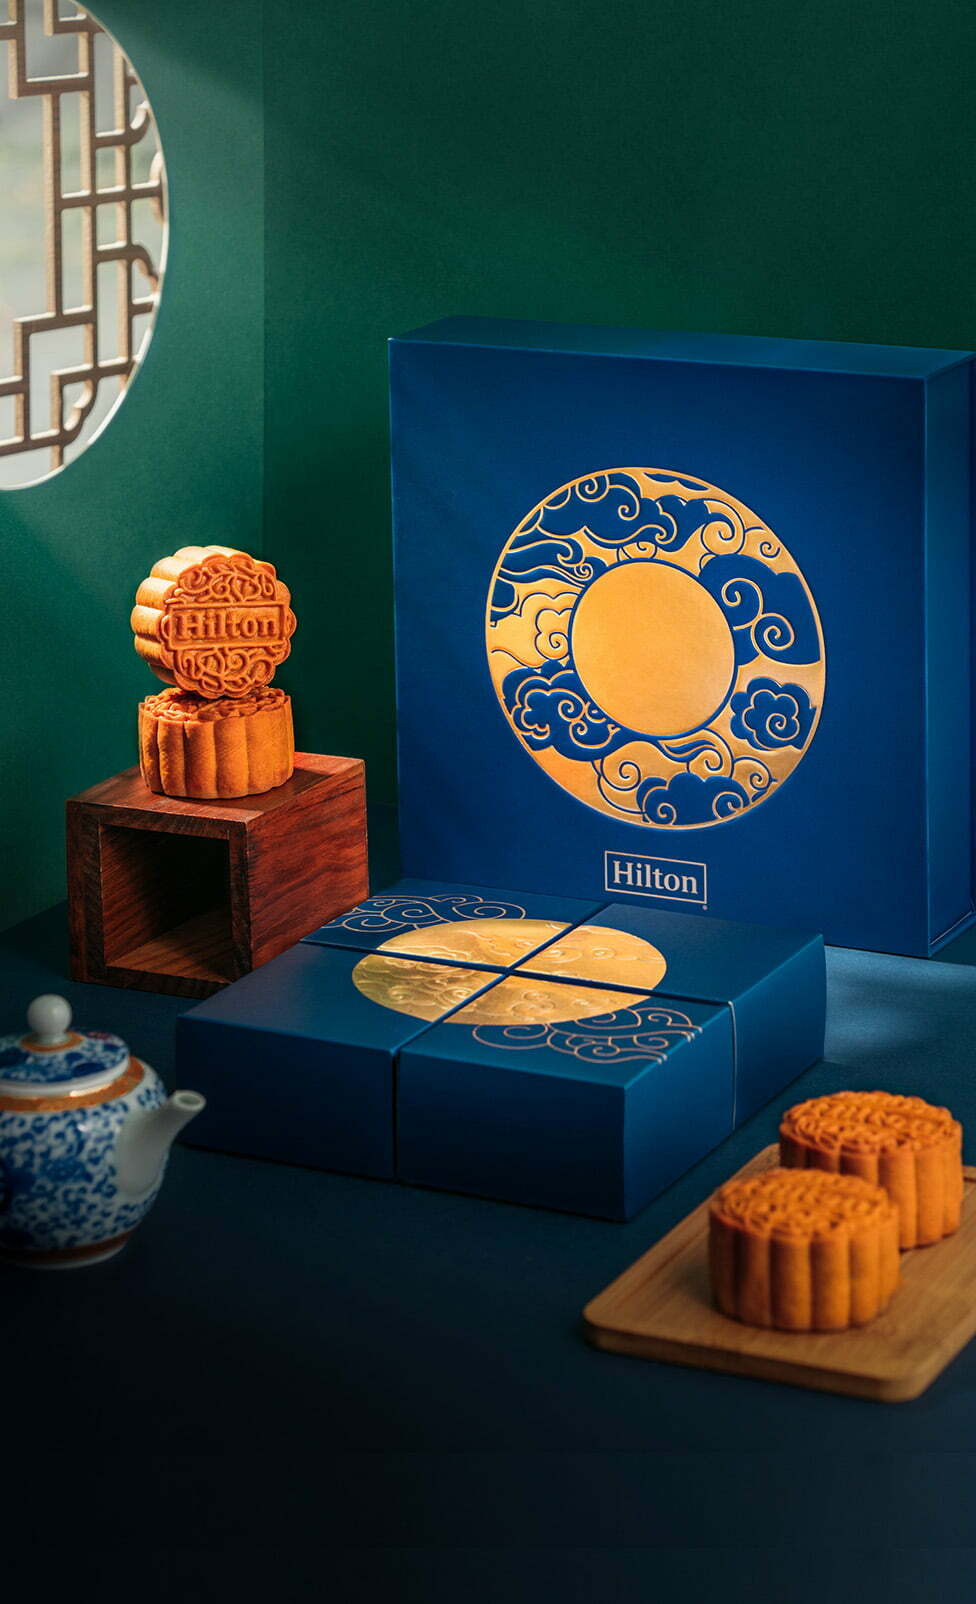 2022 Mooncakes Offering from Hilton hotels in Malaysia